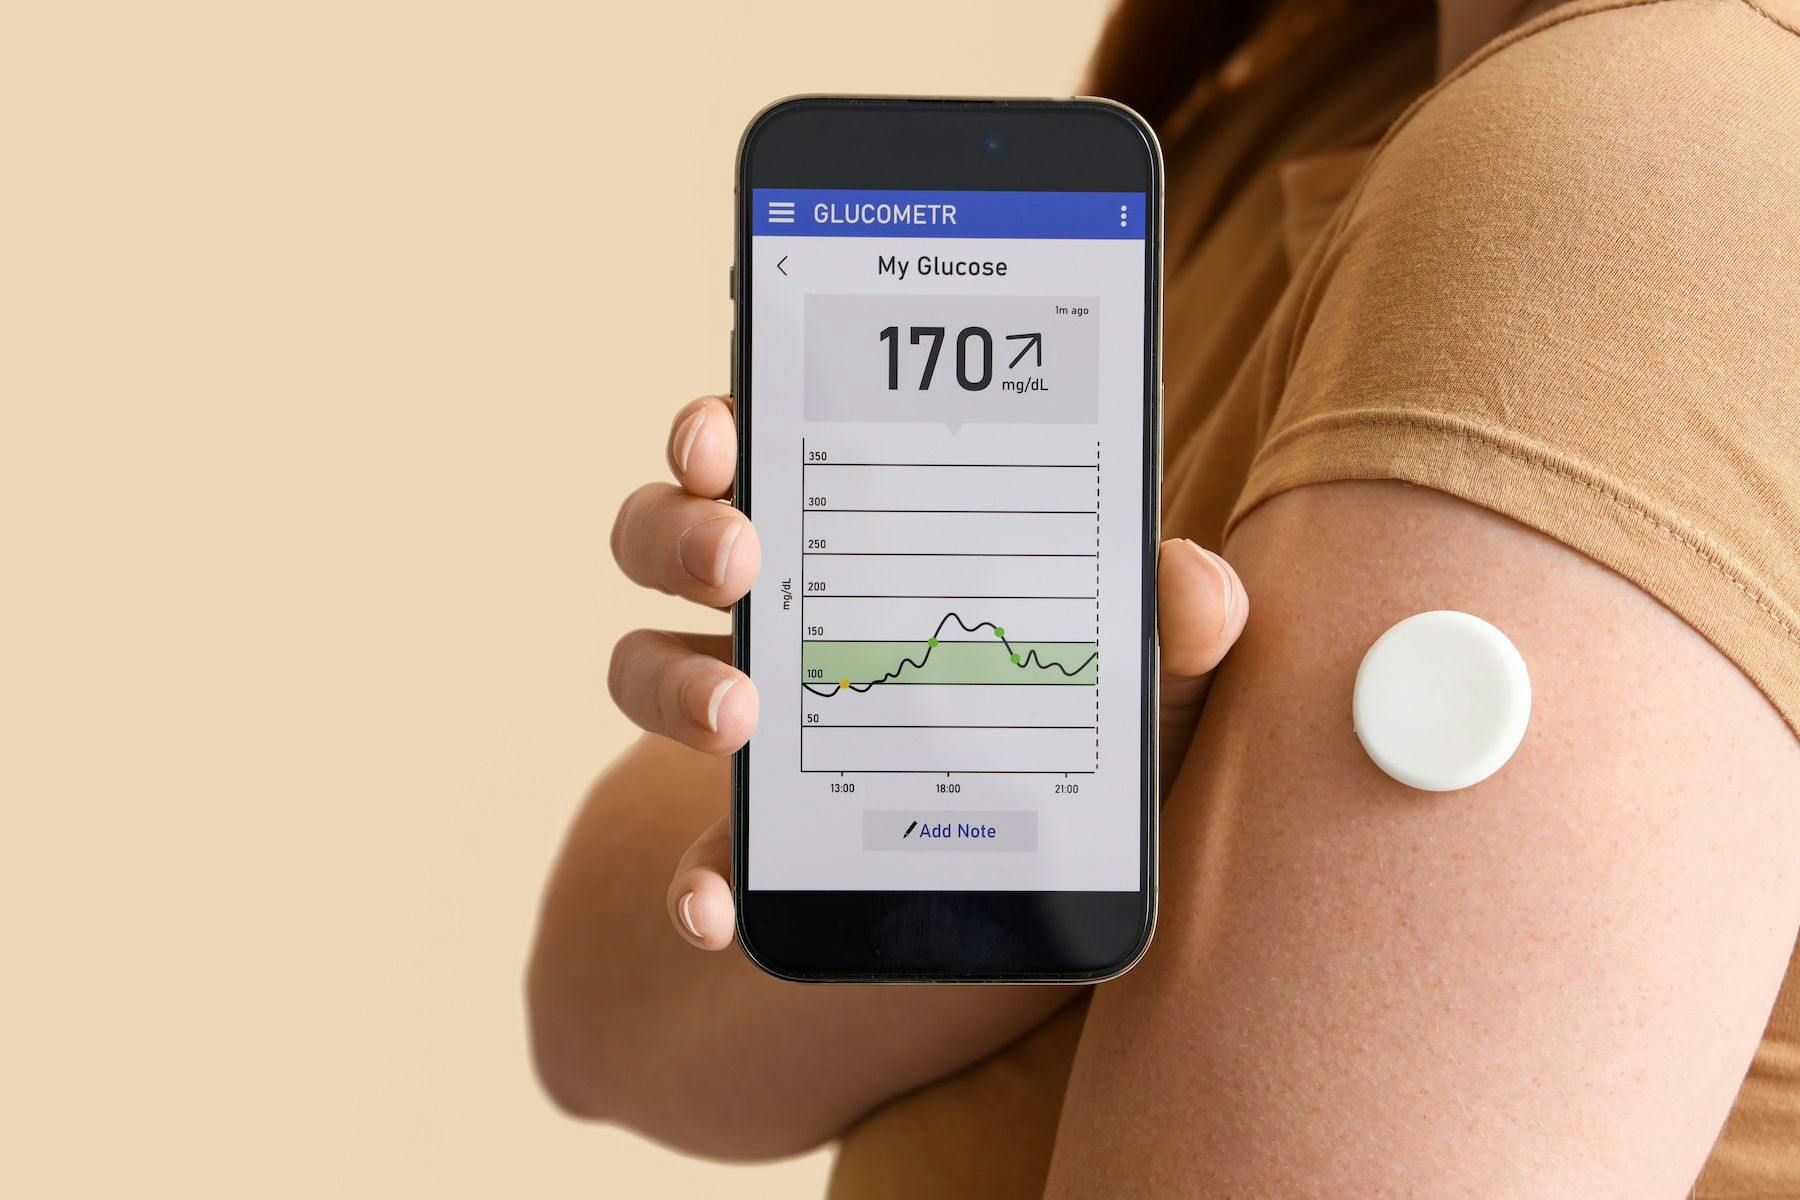 Addressing The Need for Better Access to CGM in Low-Income Areas